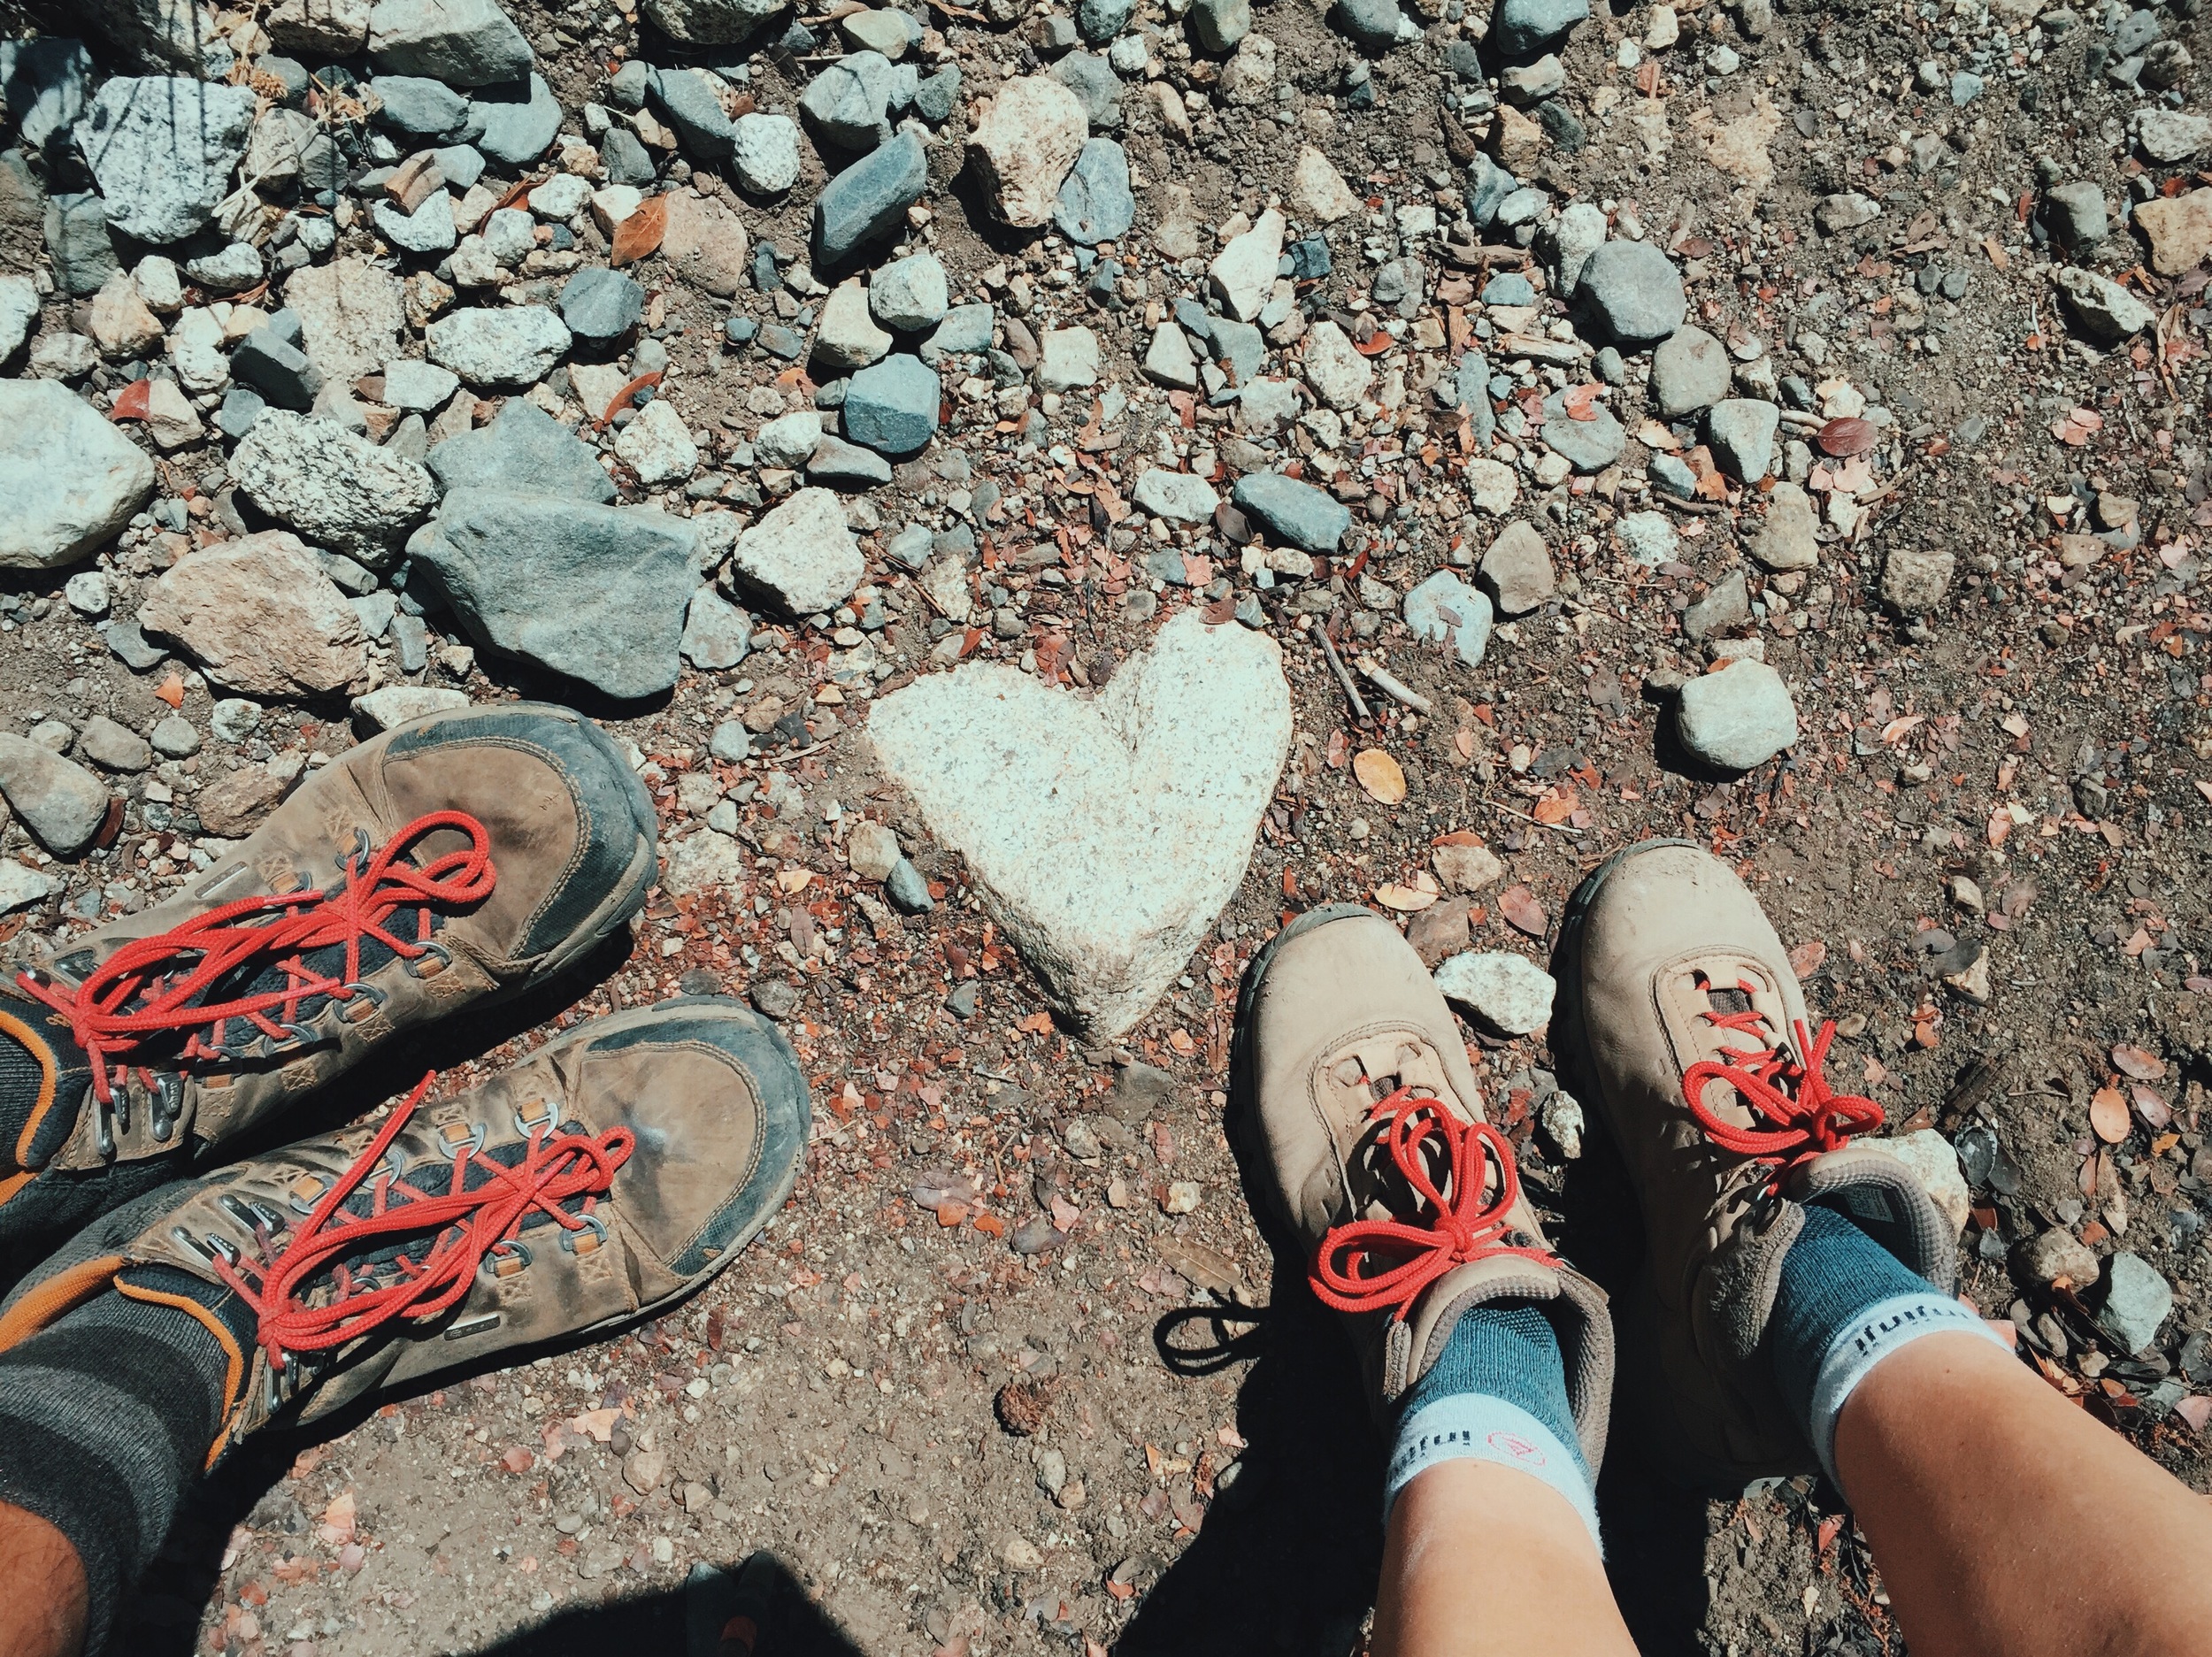  We were ready to leave Muir Trail Ranch after a night and got some encouragement by a heart-shaped rock wedged in the trail. 